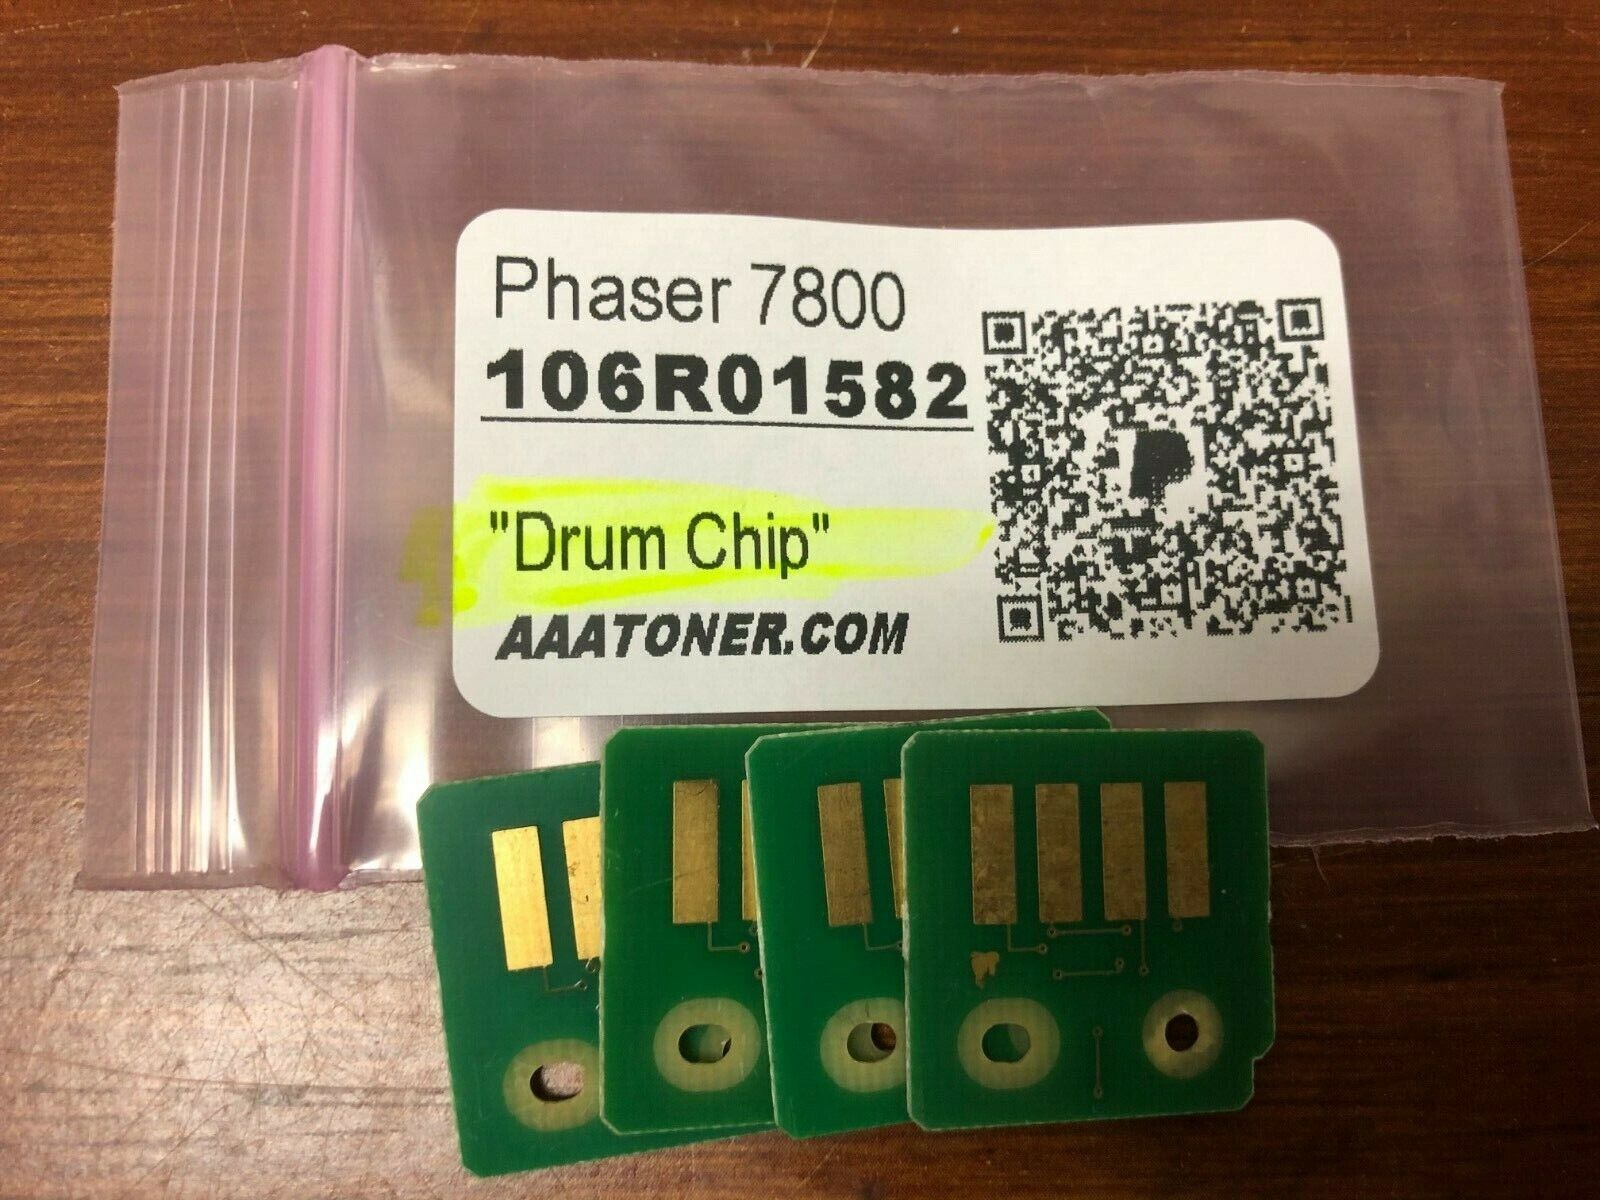 4 x DRUM Chip (106R01582) for Xerox Phaser 7800, 7800DX, 7800DN, 7800GX Refill